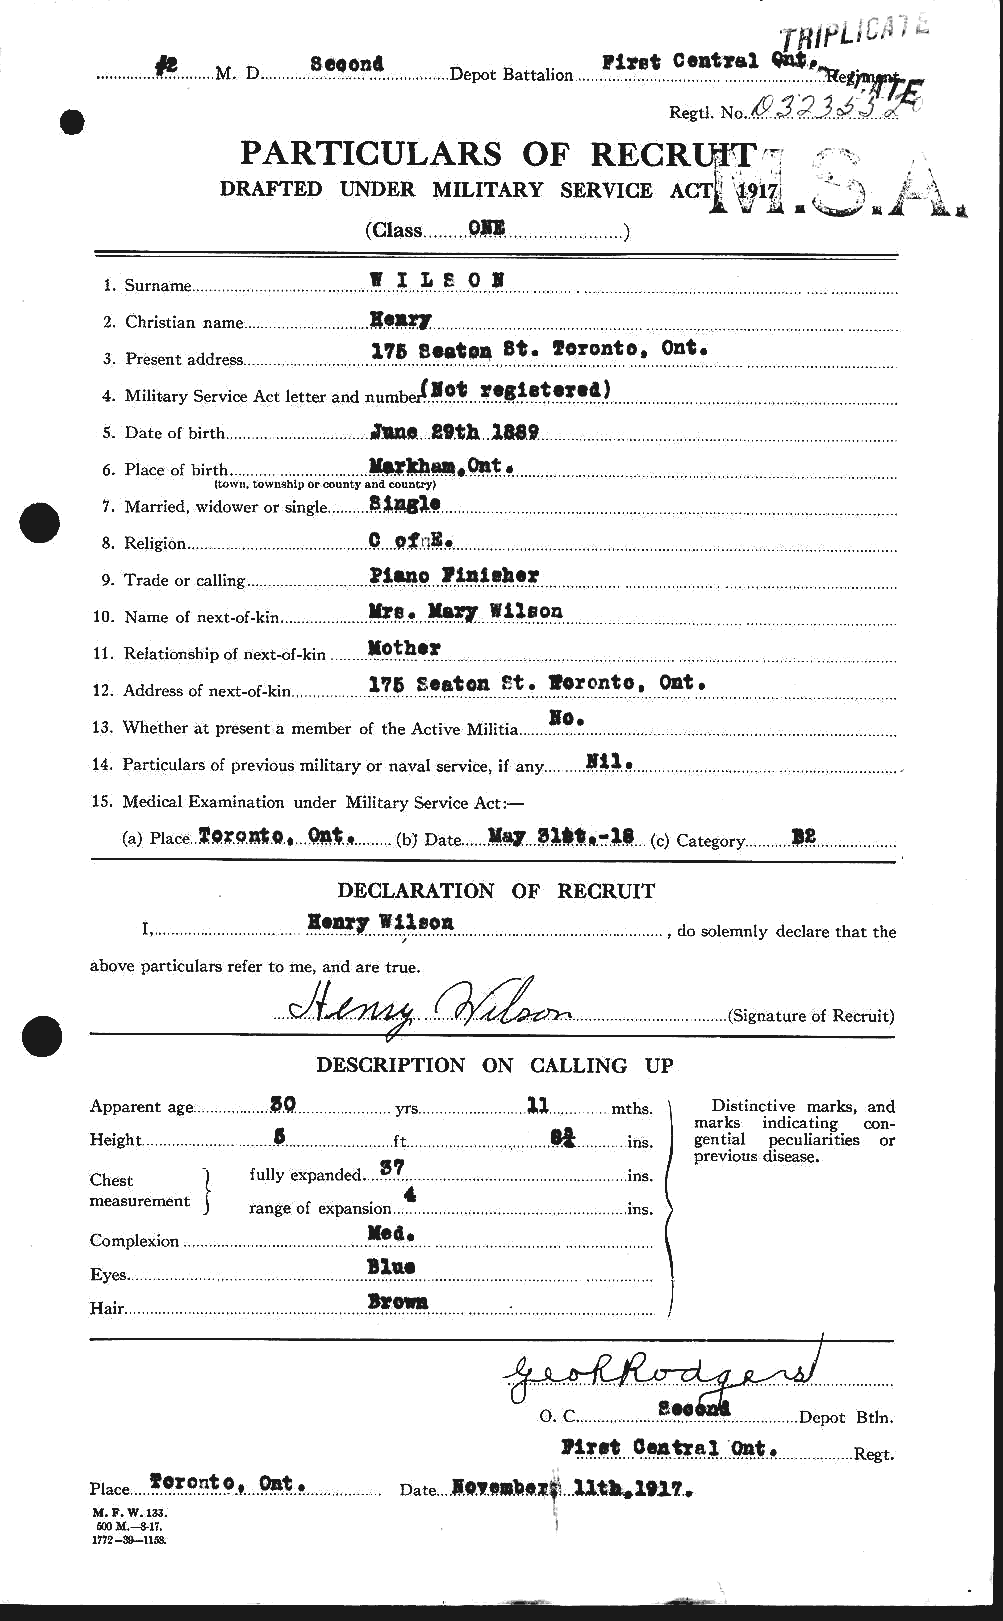 Personnel Records of the First World War - CEF 679495a